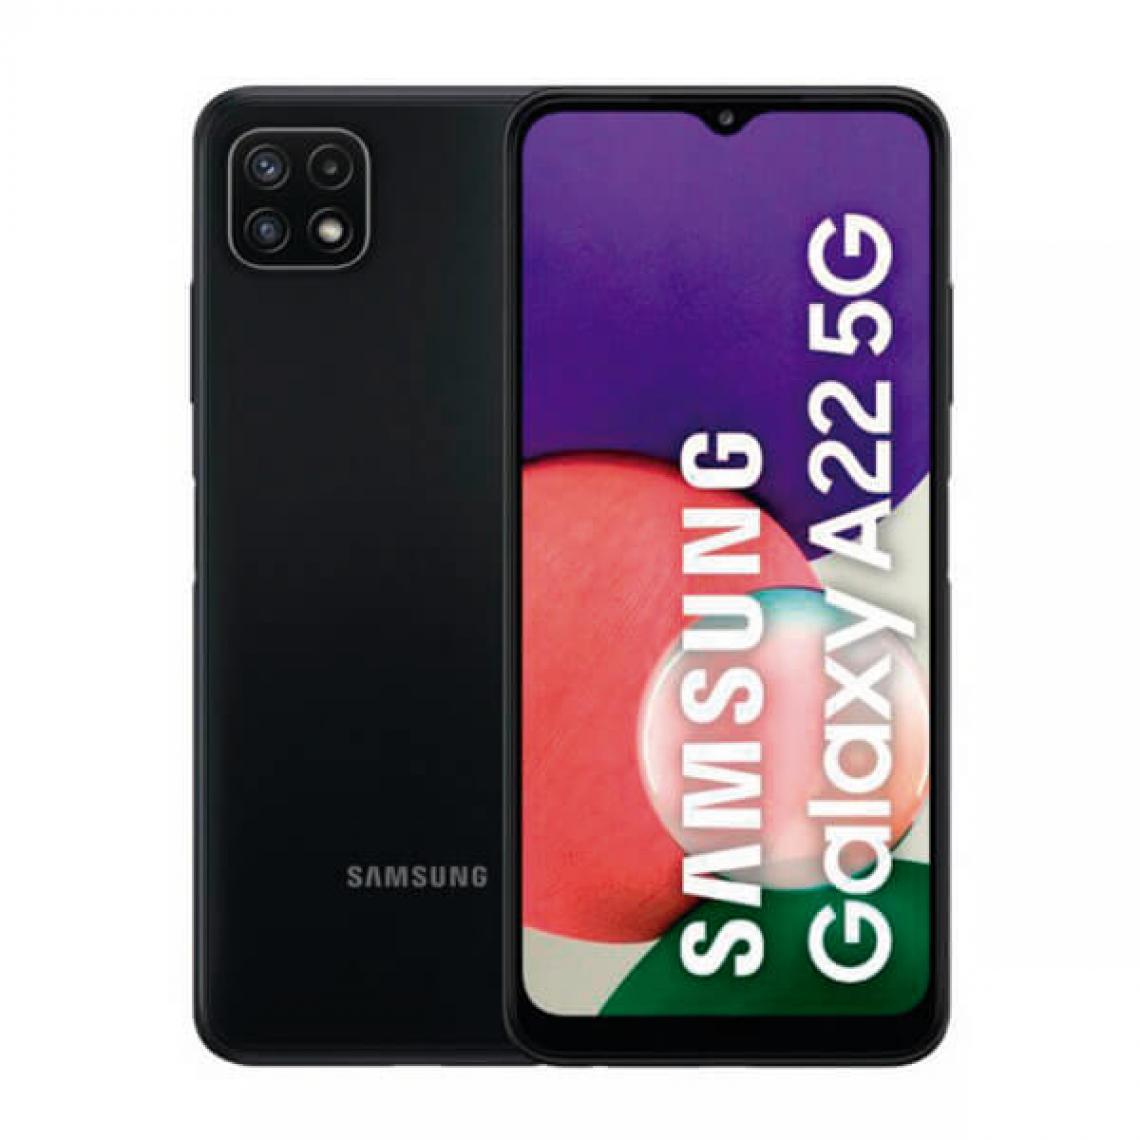 Samsung - Smartphone Galaxy A22 5G Gris - Smartphone Android